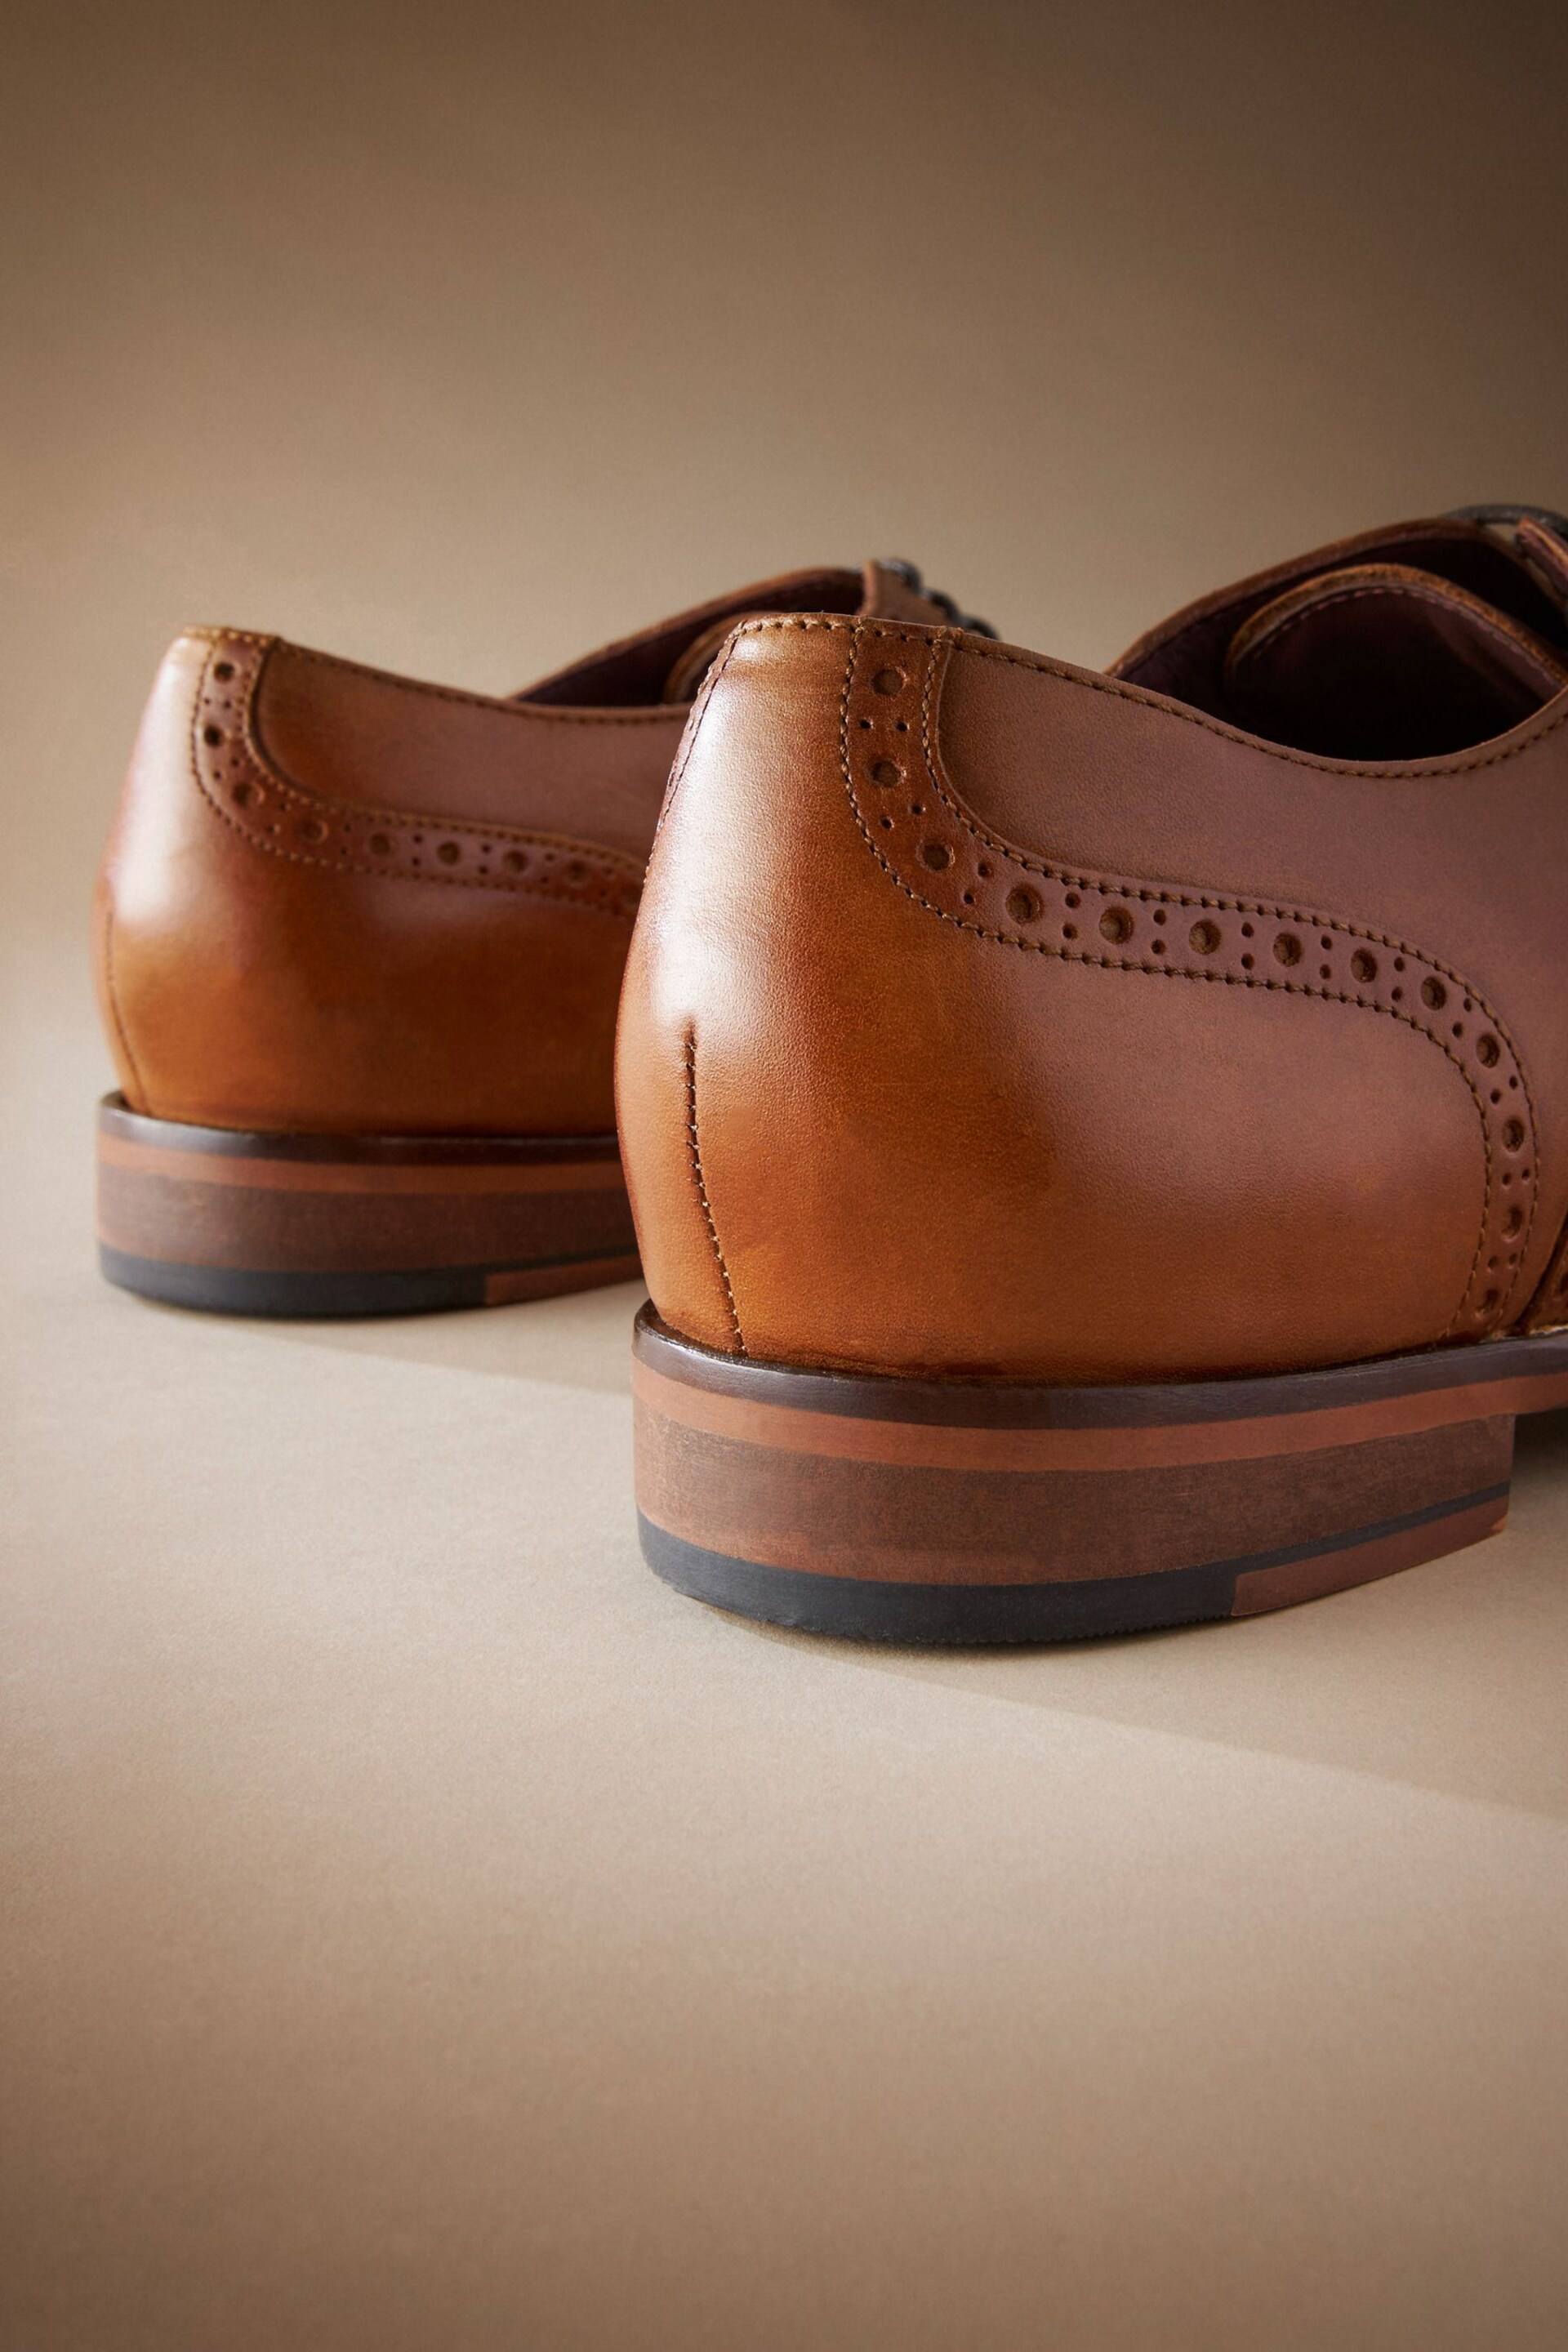 Tan Brown Wide Fit Signature Italian Leather Wing Cap Brogues - Image 5 of 5